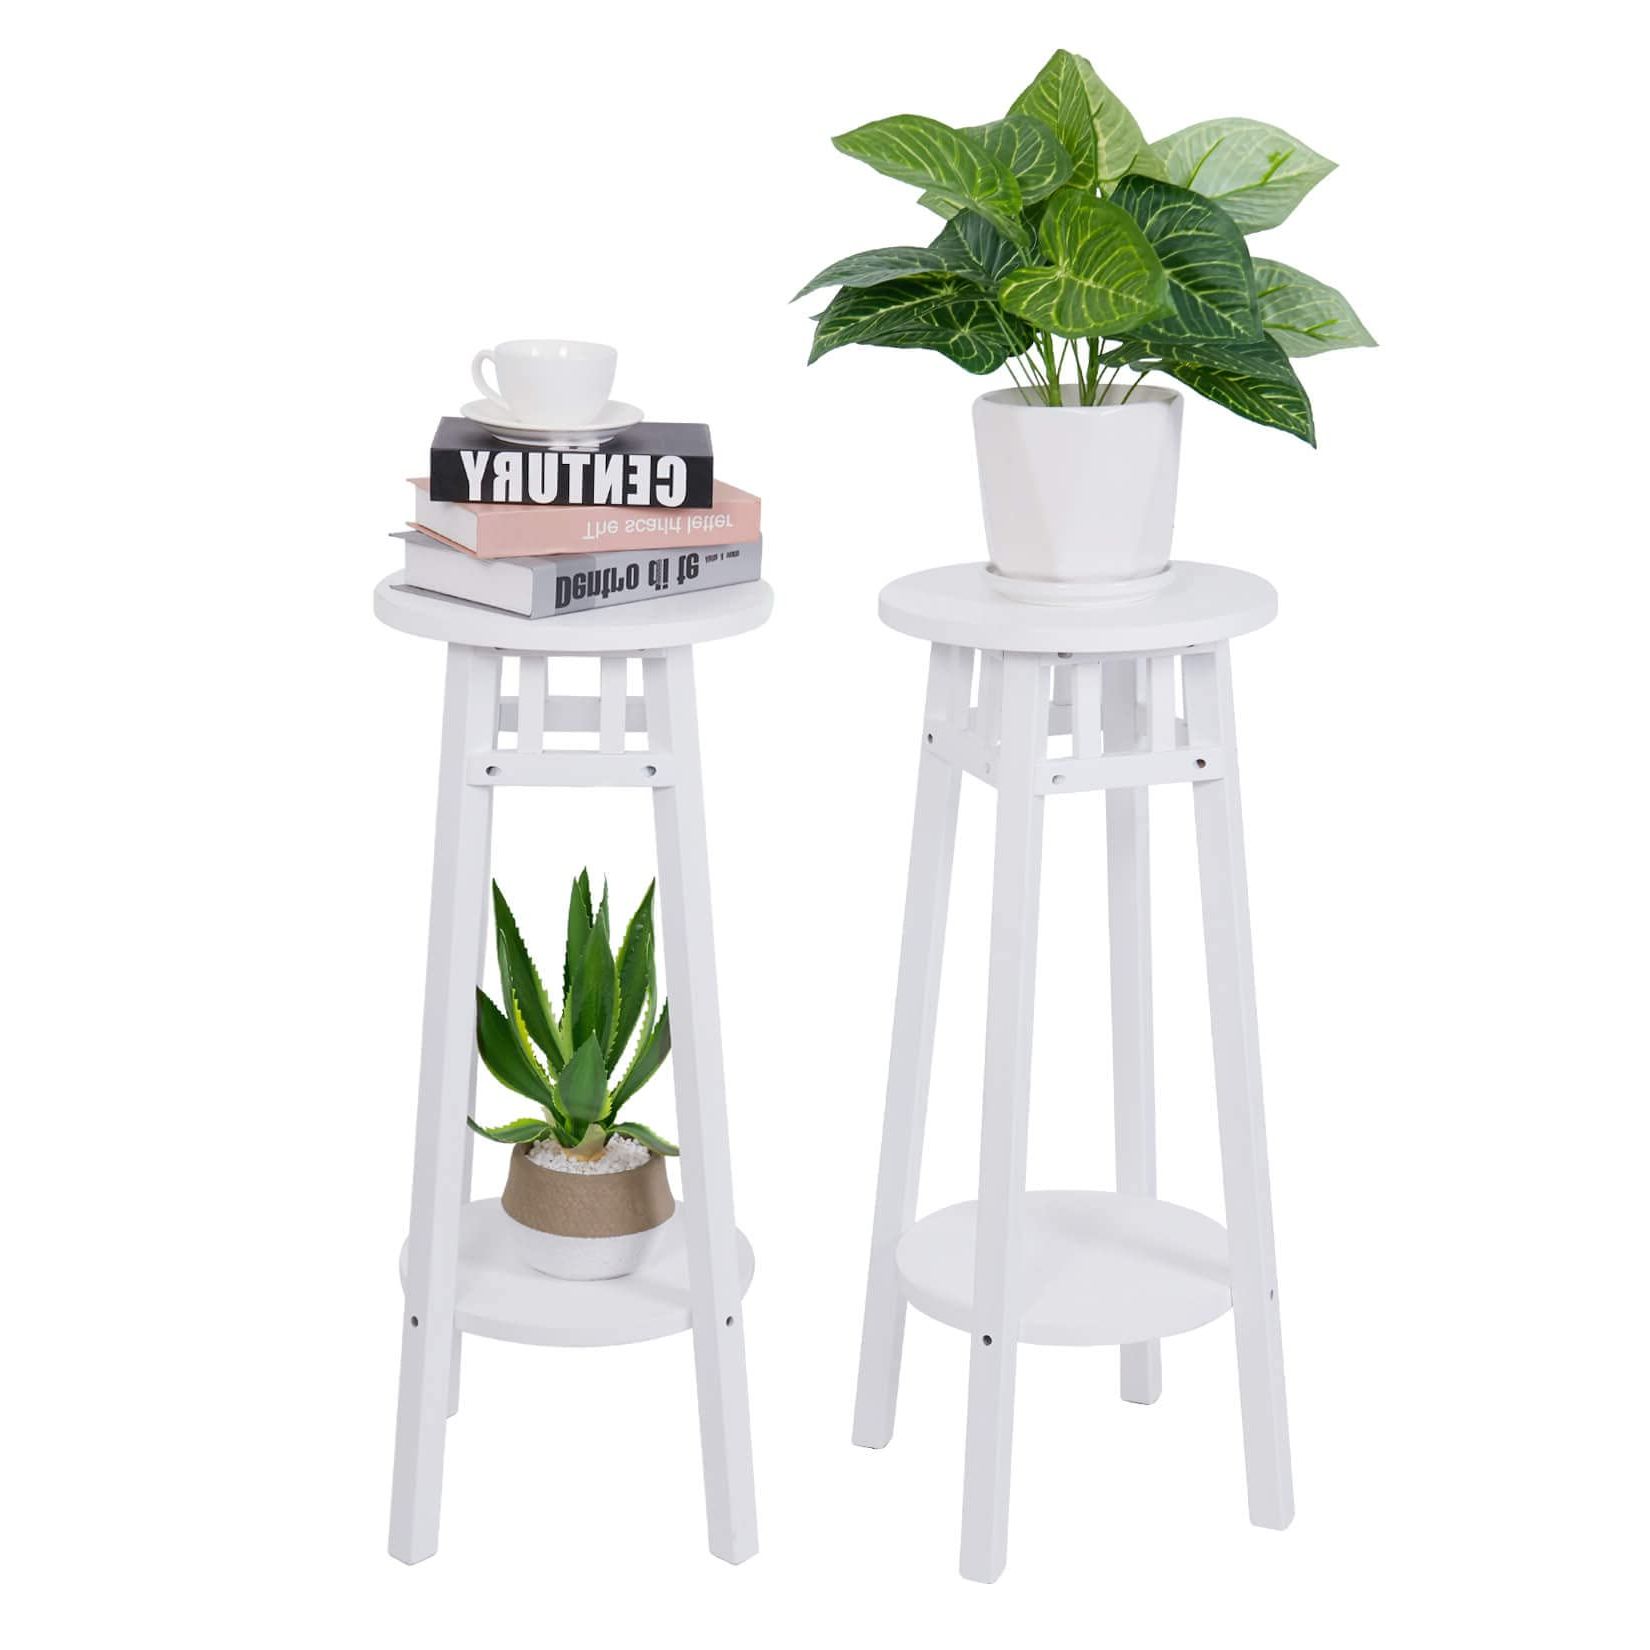 Amazon: Unho Wood Plant Stand White: 31 Inch Tall Round End Table With  2 Tier Shelves Home Furnishing Modern Side Desk Indoor For Living Room  Window Balcony Entryway Patio Garden Décor (2 With Regard To Most Recently Released 31 Inch Plant Stands (View 11 of 15)